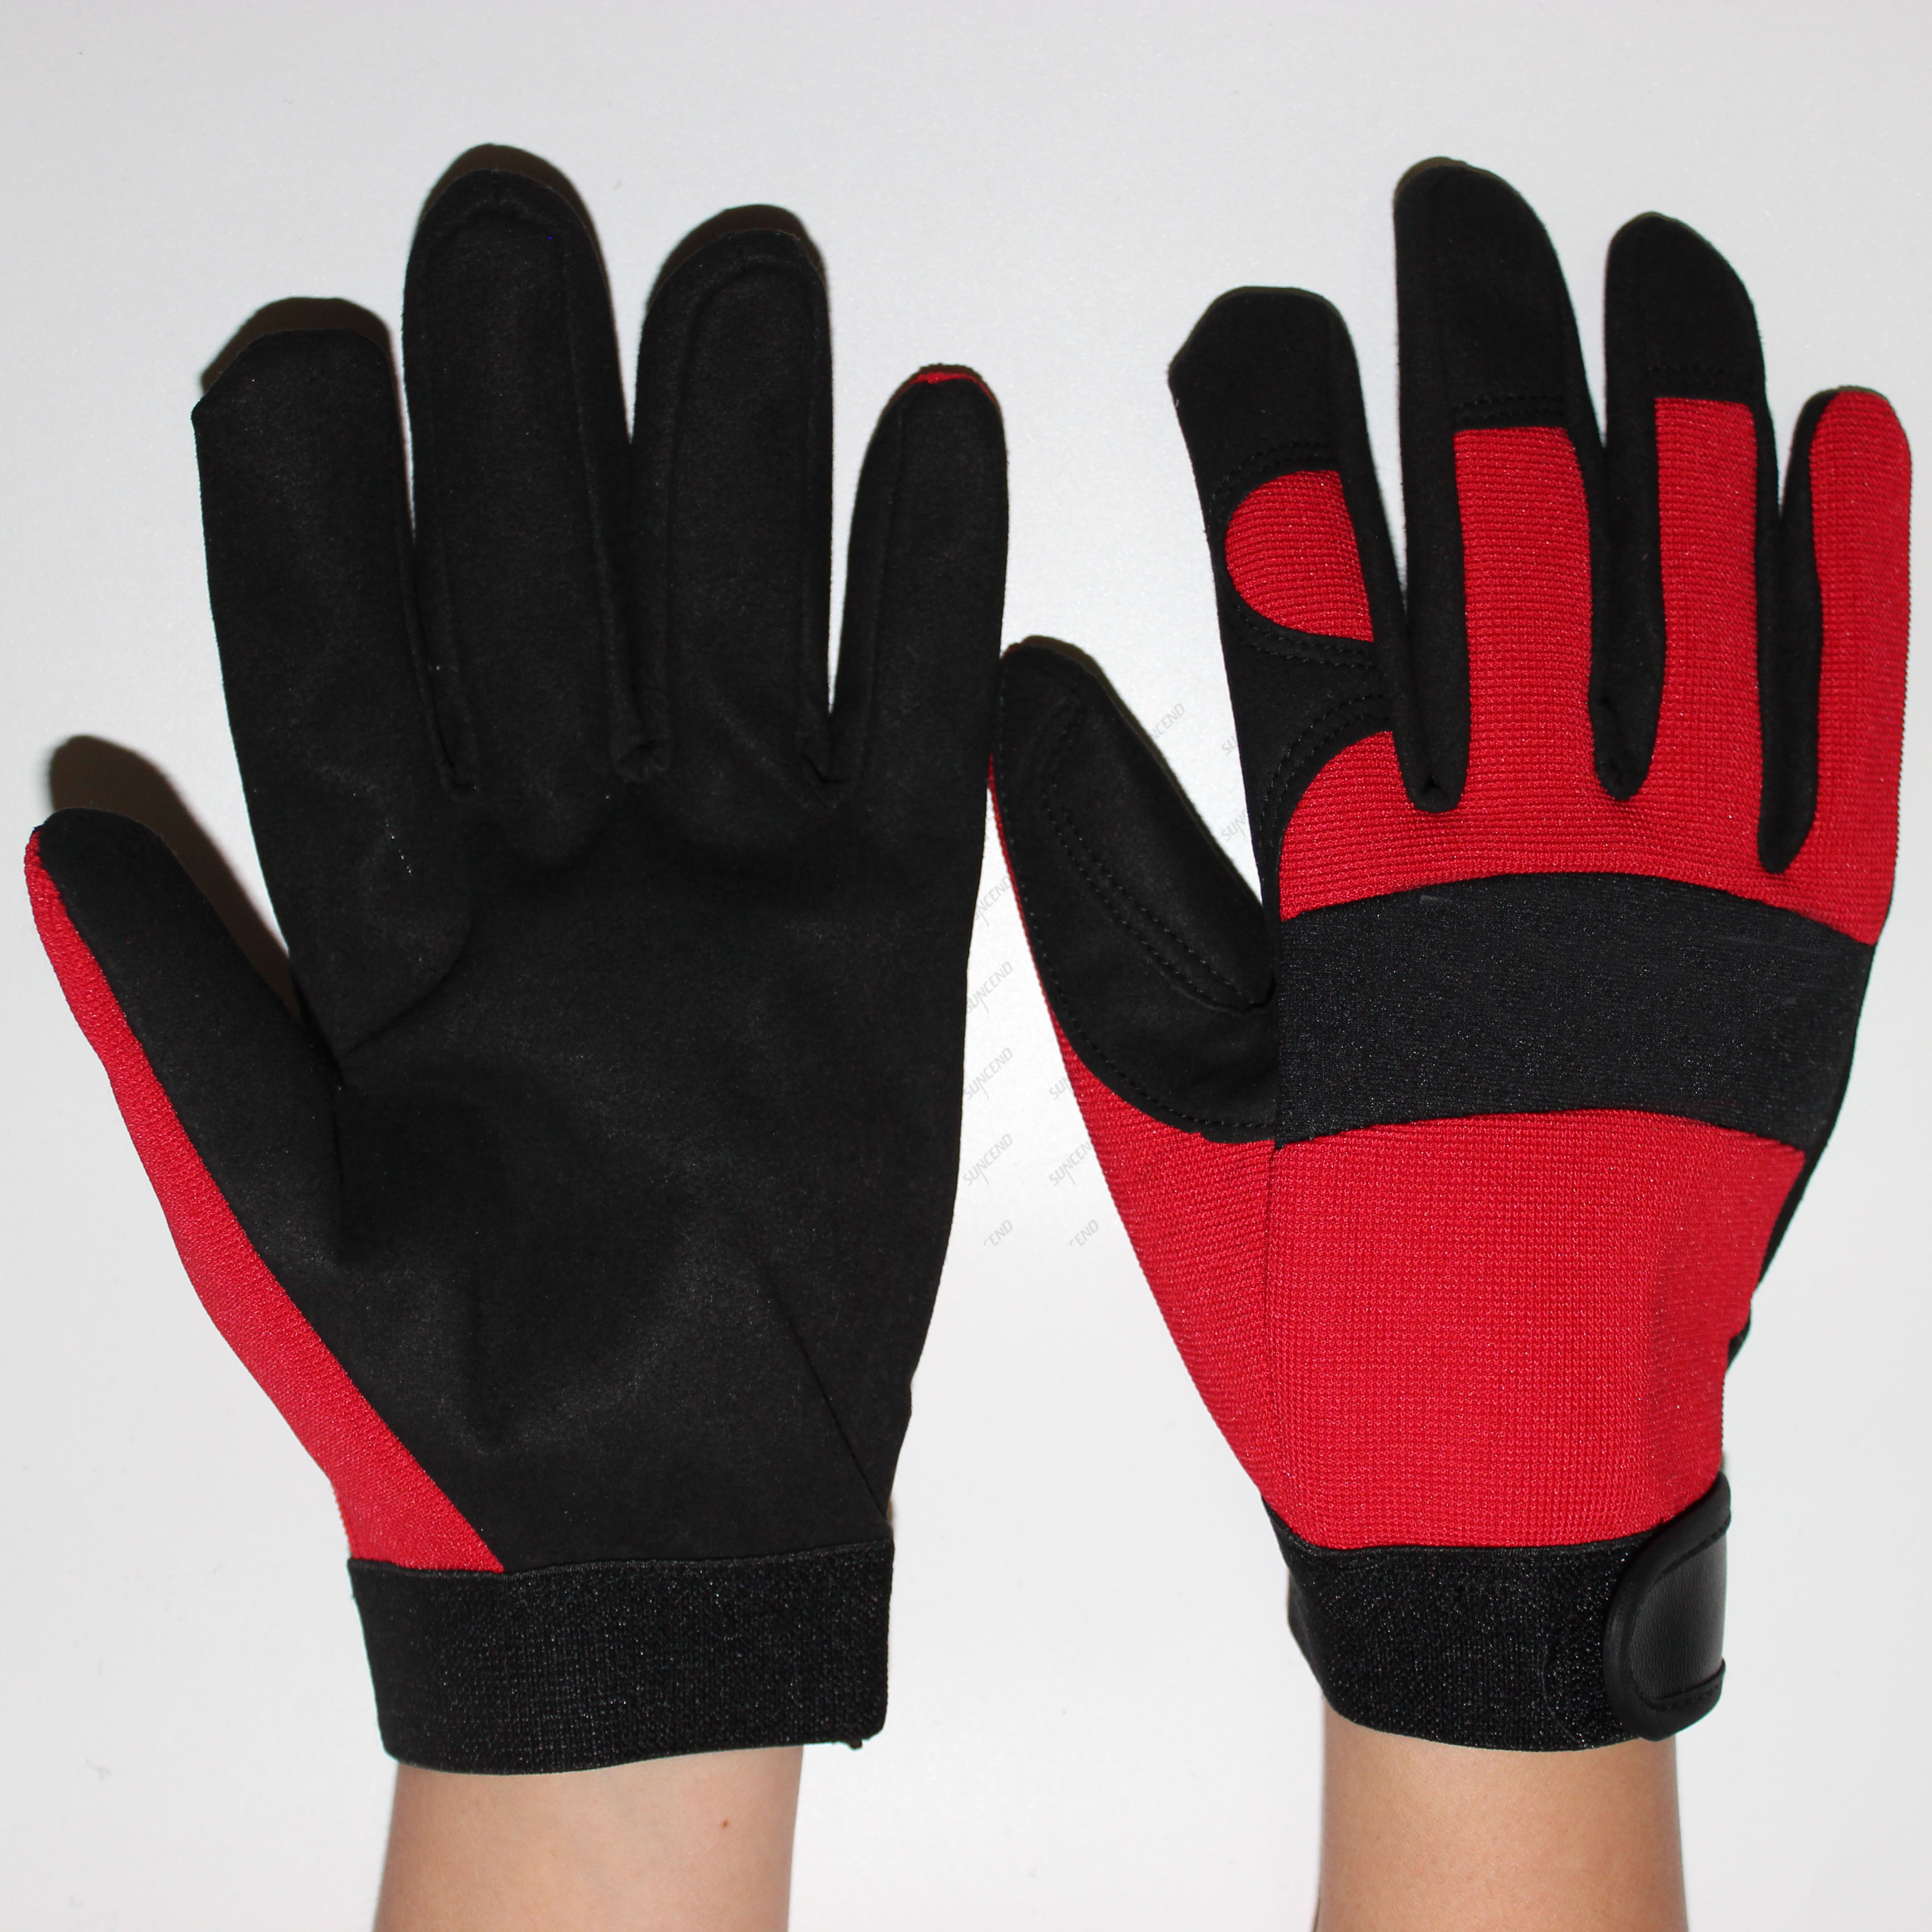 MECHANIC GLOVES For Working On Cars Work Safety Gloves Protect Fingers And Hands